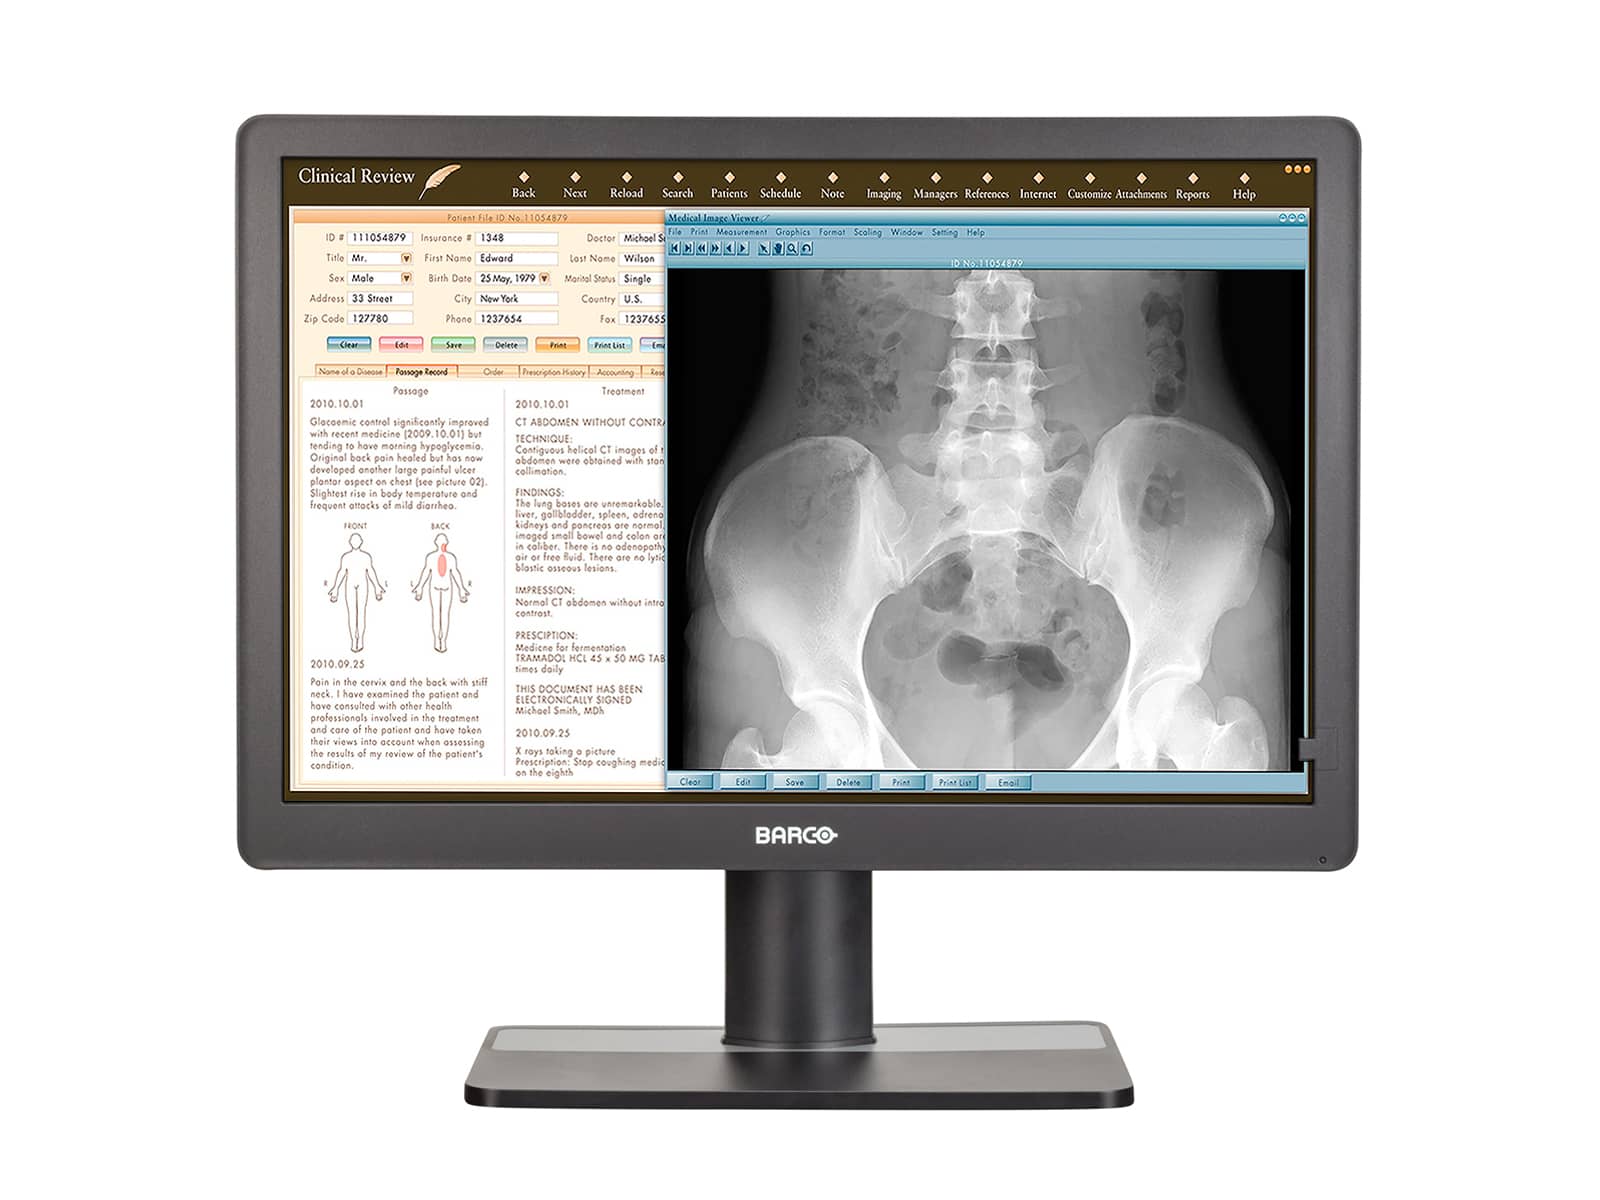 Barco Eonis MDRC-2222 Full HD 1080P 22" Clinical Review LED Monitor (K9307944) Monitors.com 